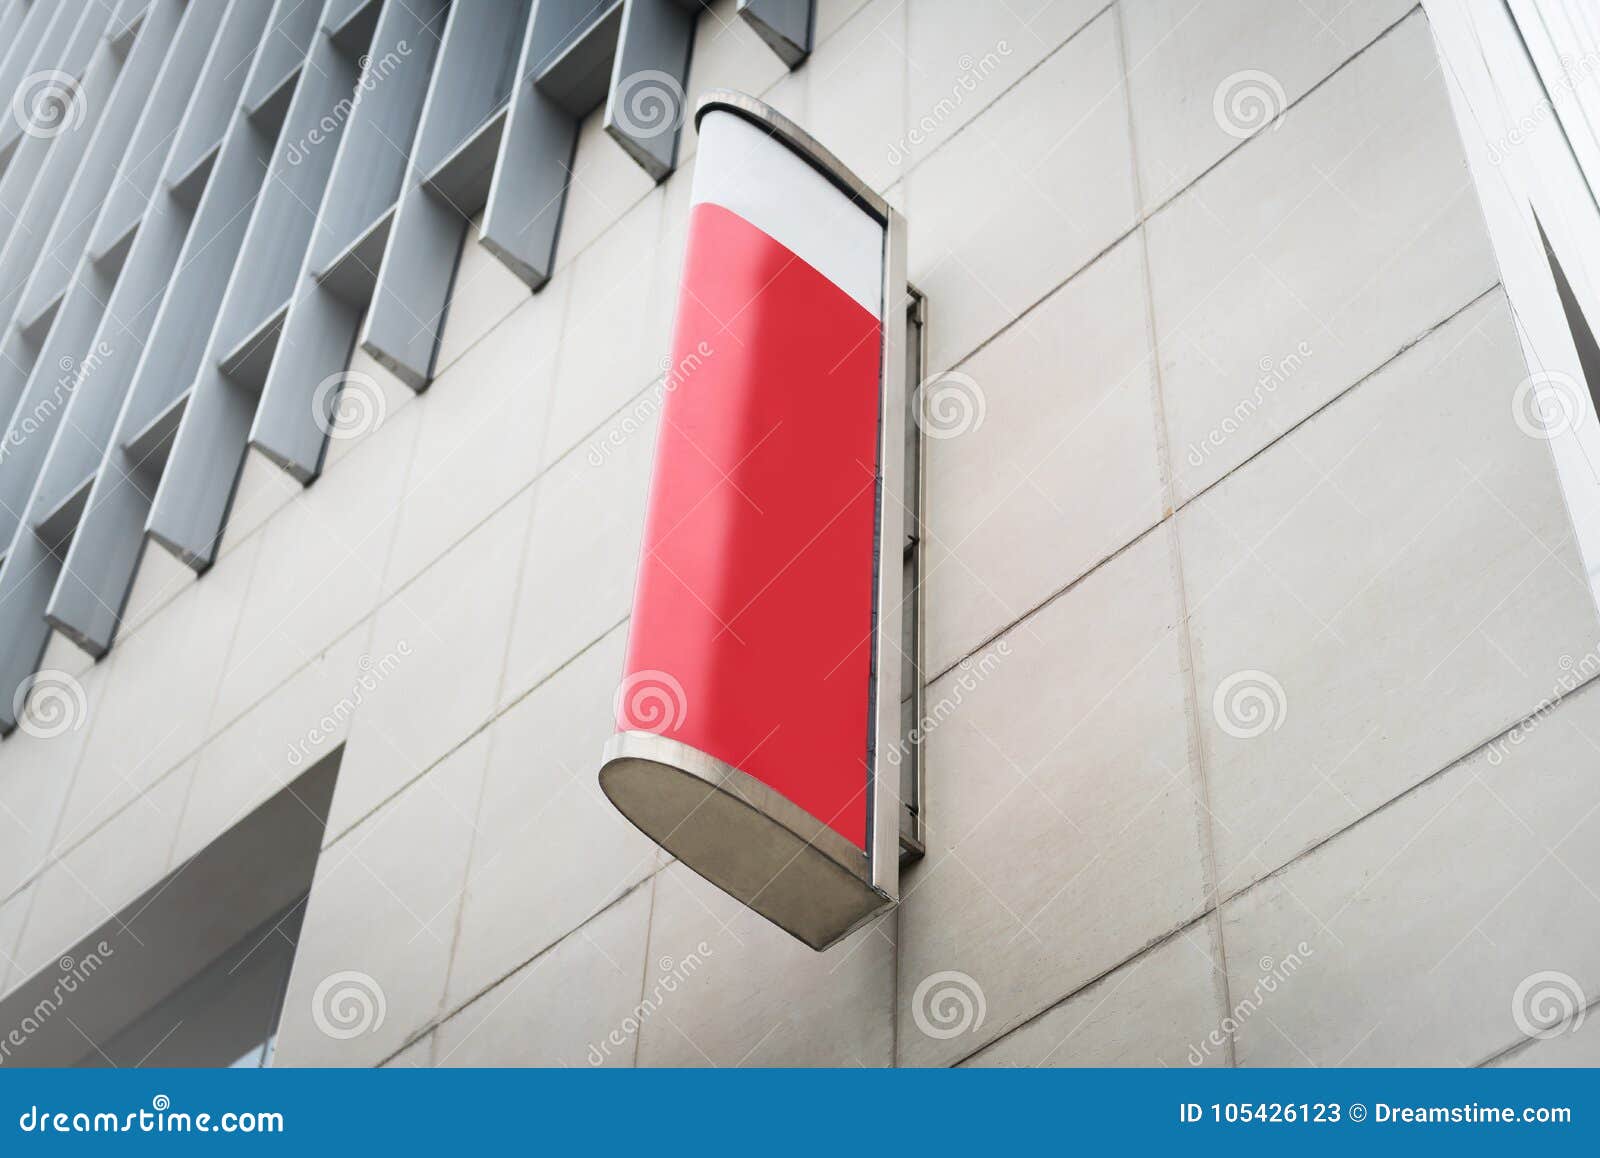 Download 1 278 Building Logo Mockup Photos Free Royalty Free Stock Photos From Dreamstime